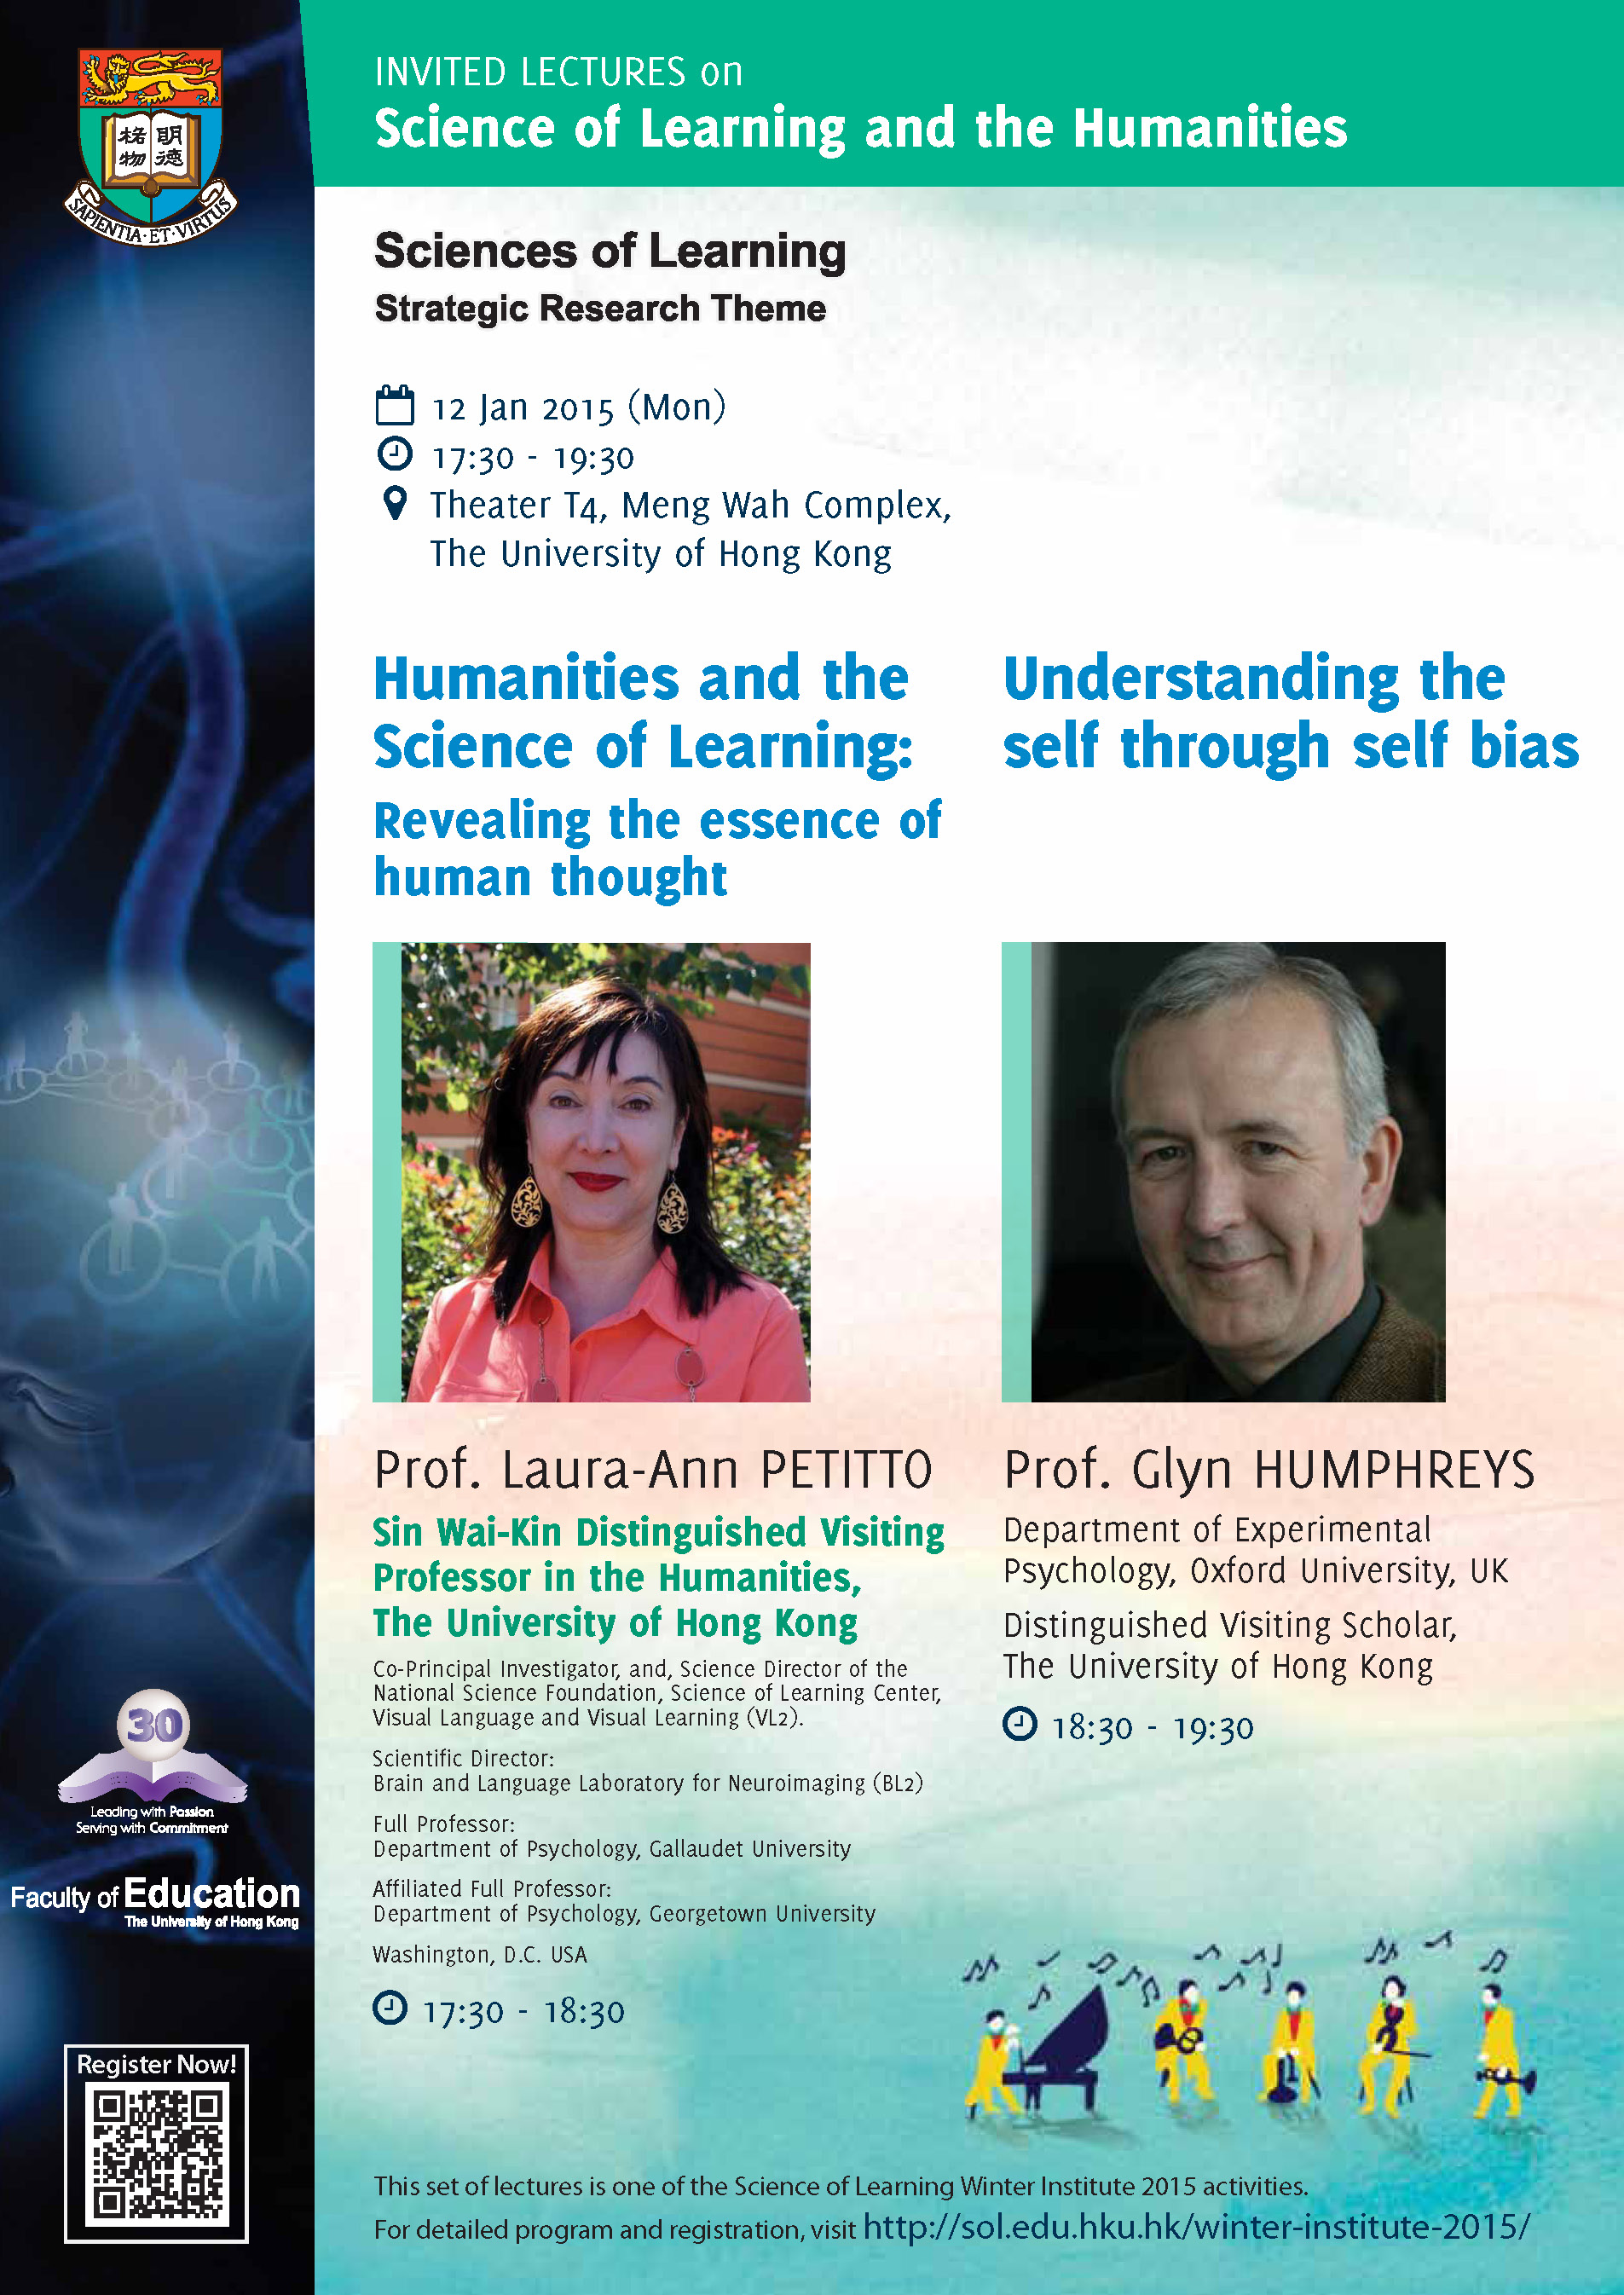 Invited Lectures on Science of Learning and the Humanities